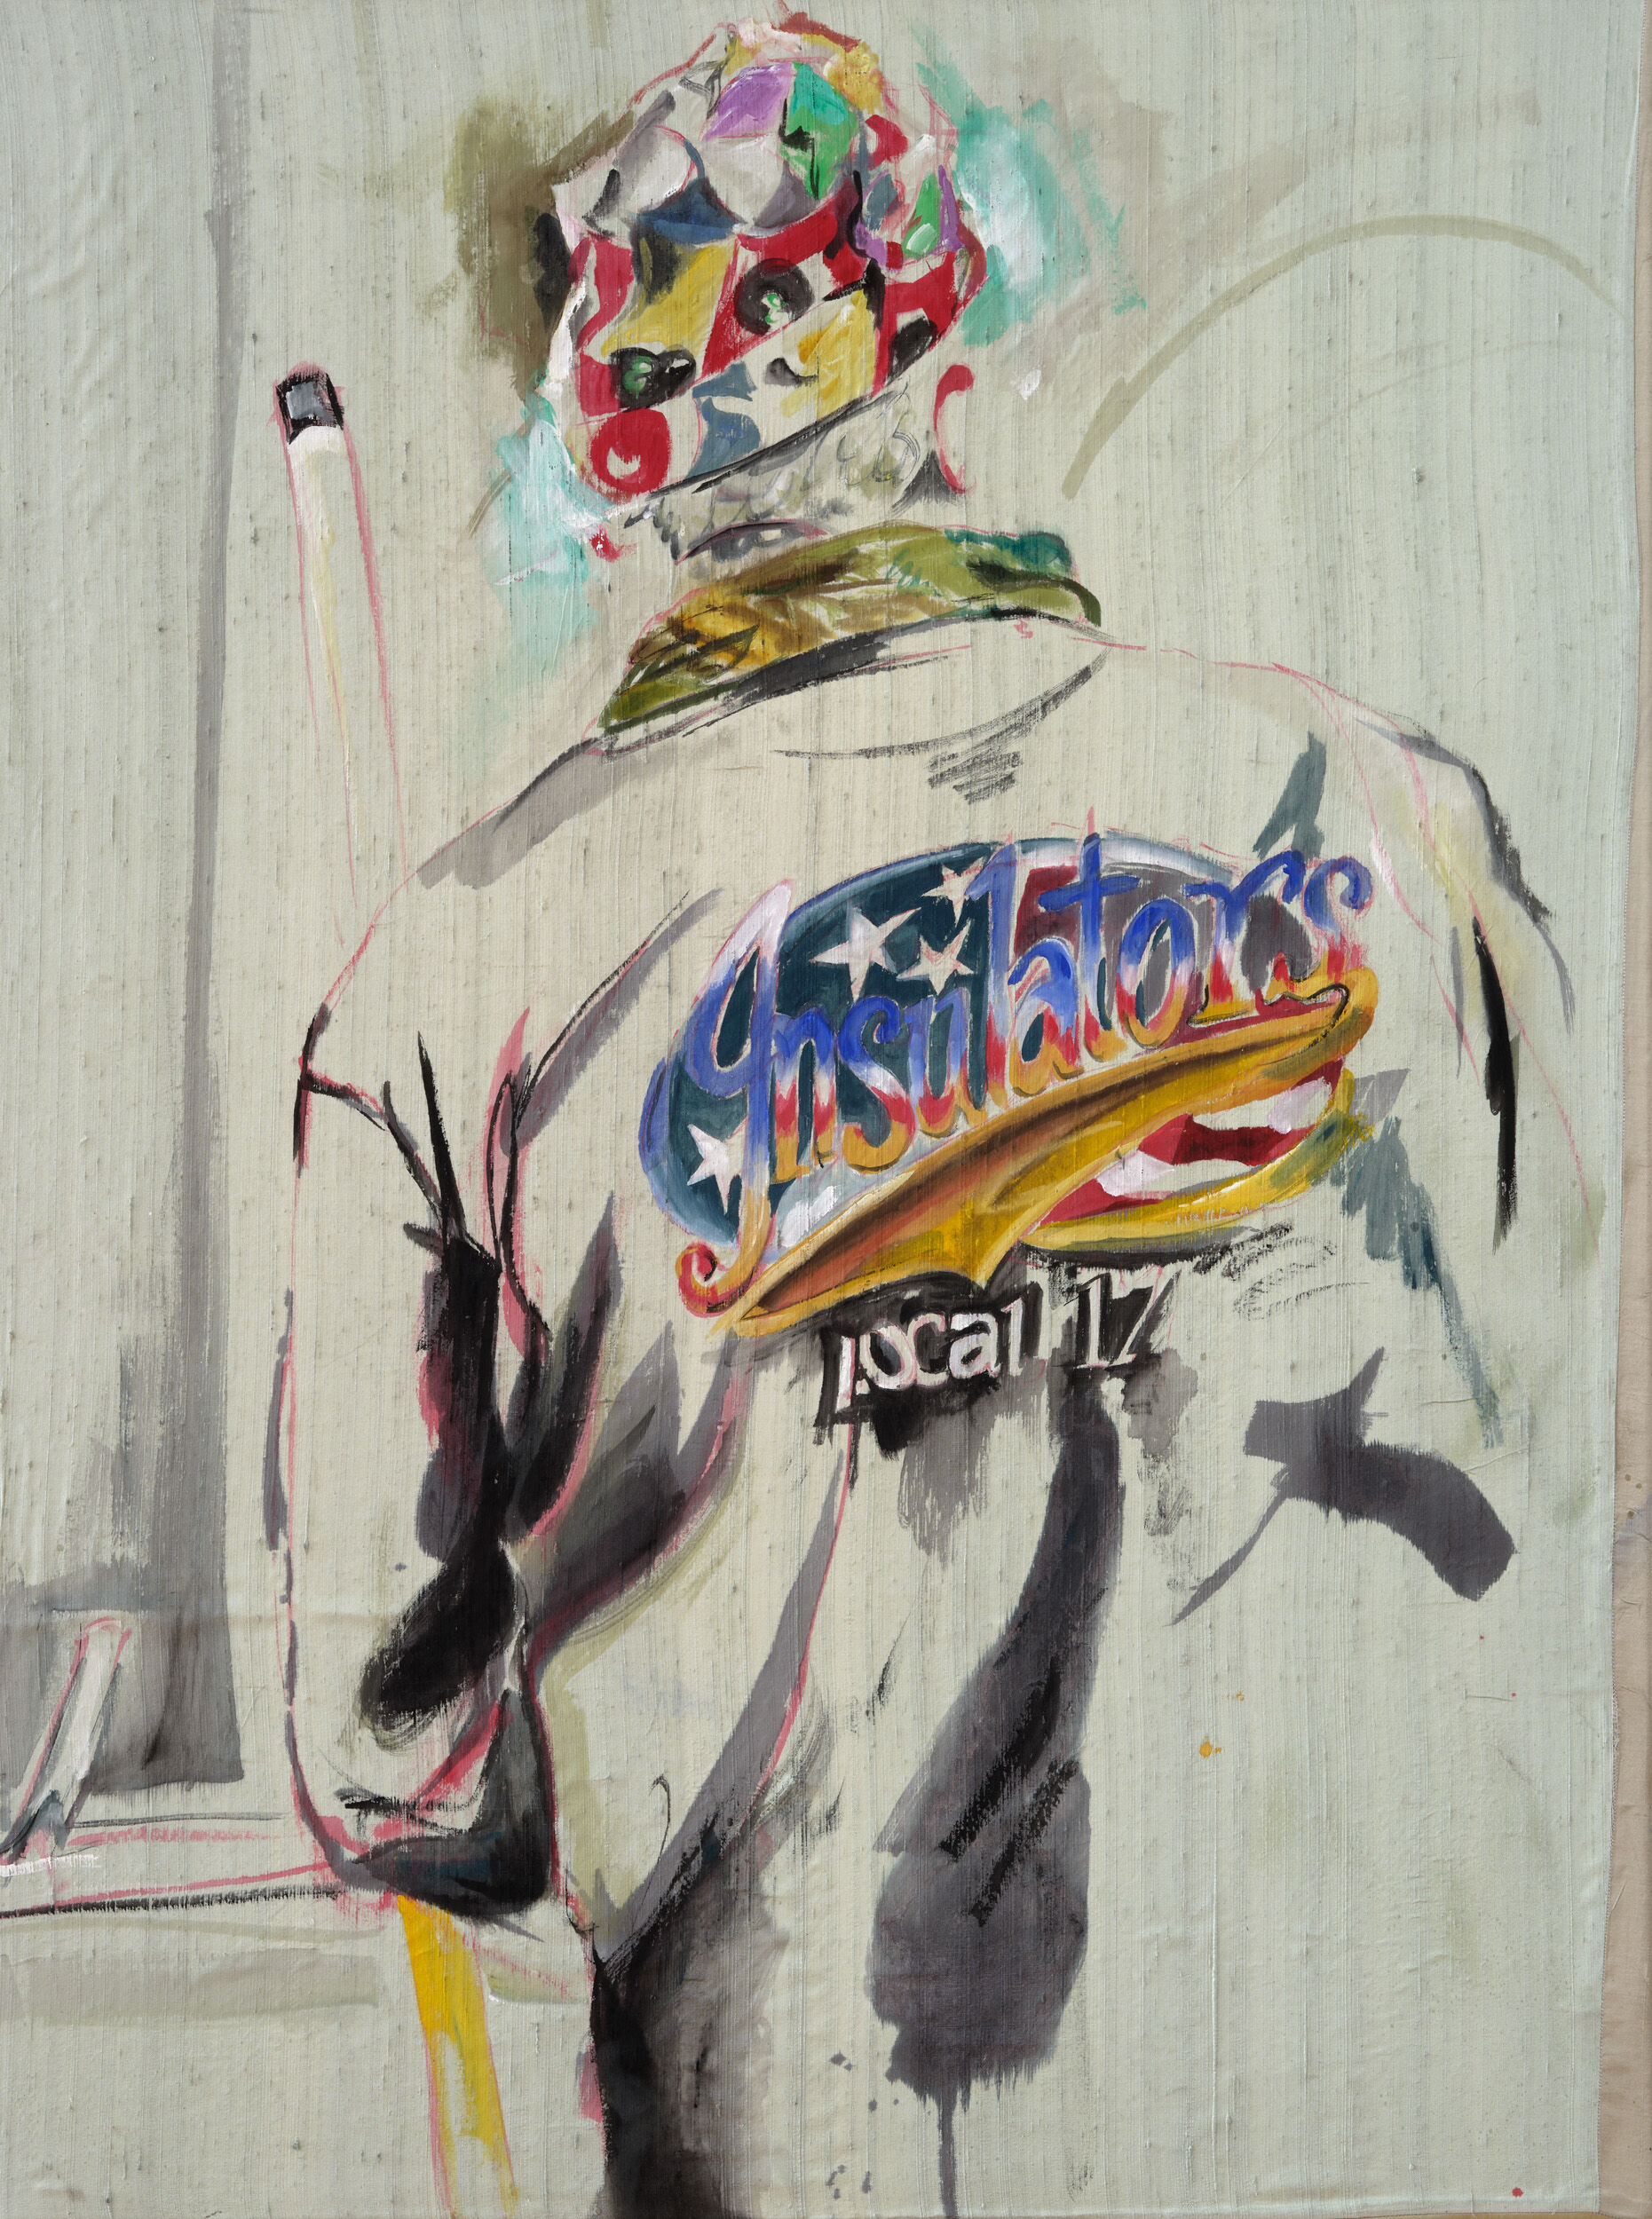 A Maggie Crowley portrait of the back of a person wearing a jacket emblazoned with a labor union slogan